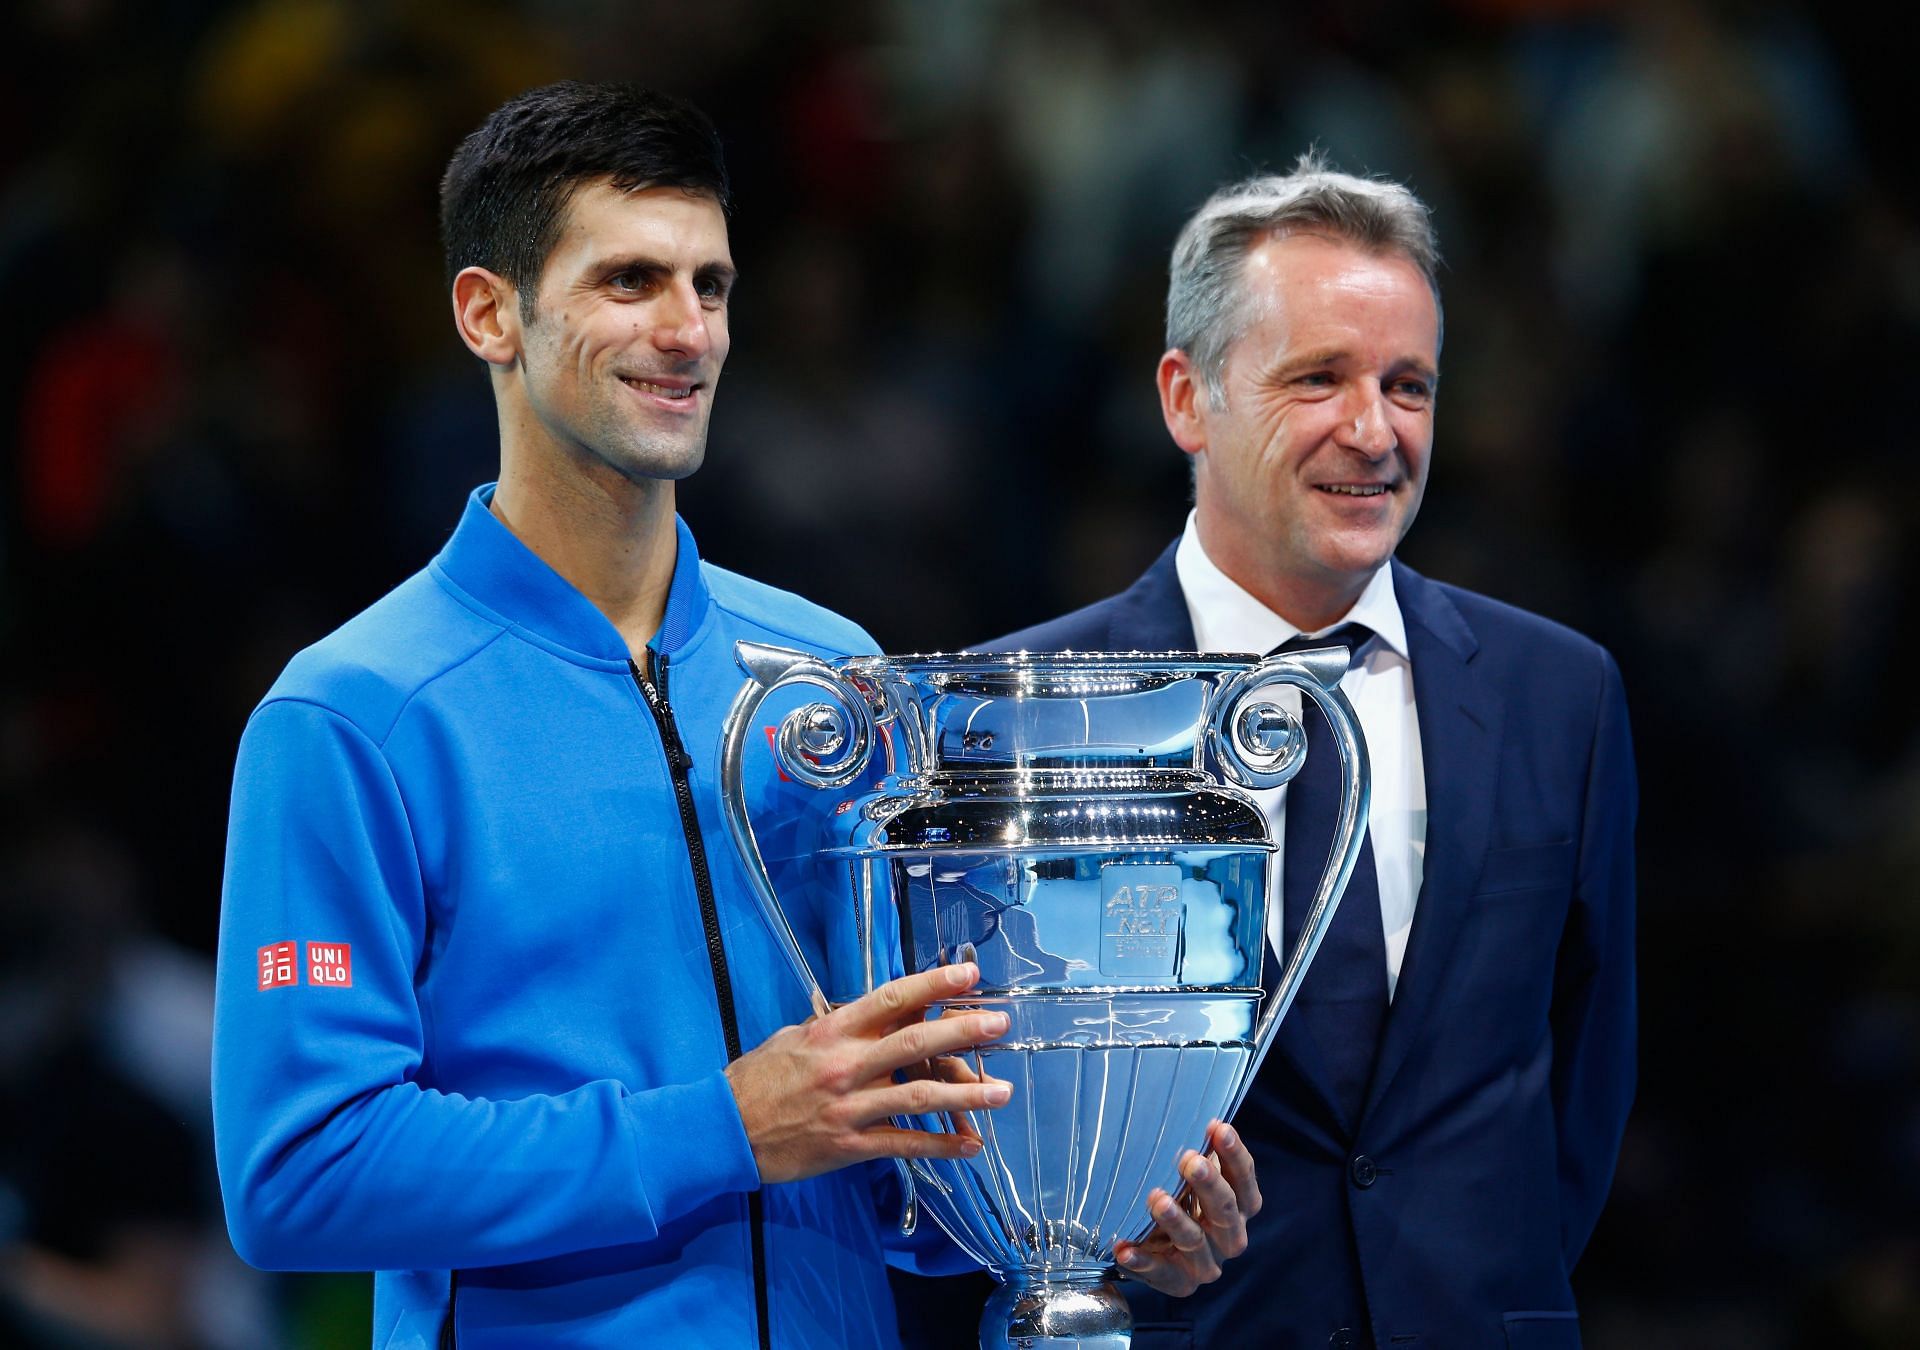 Novak Djokovic with the year-end number 1 title following his most prolific season in 2015